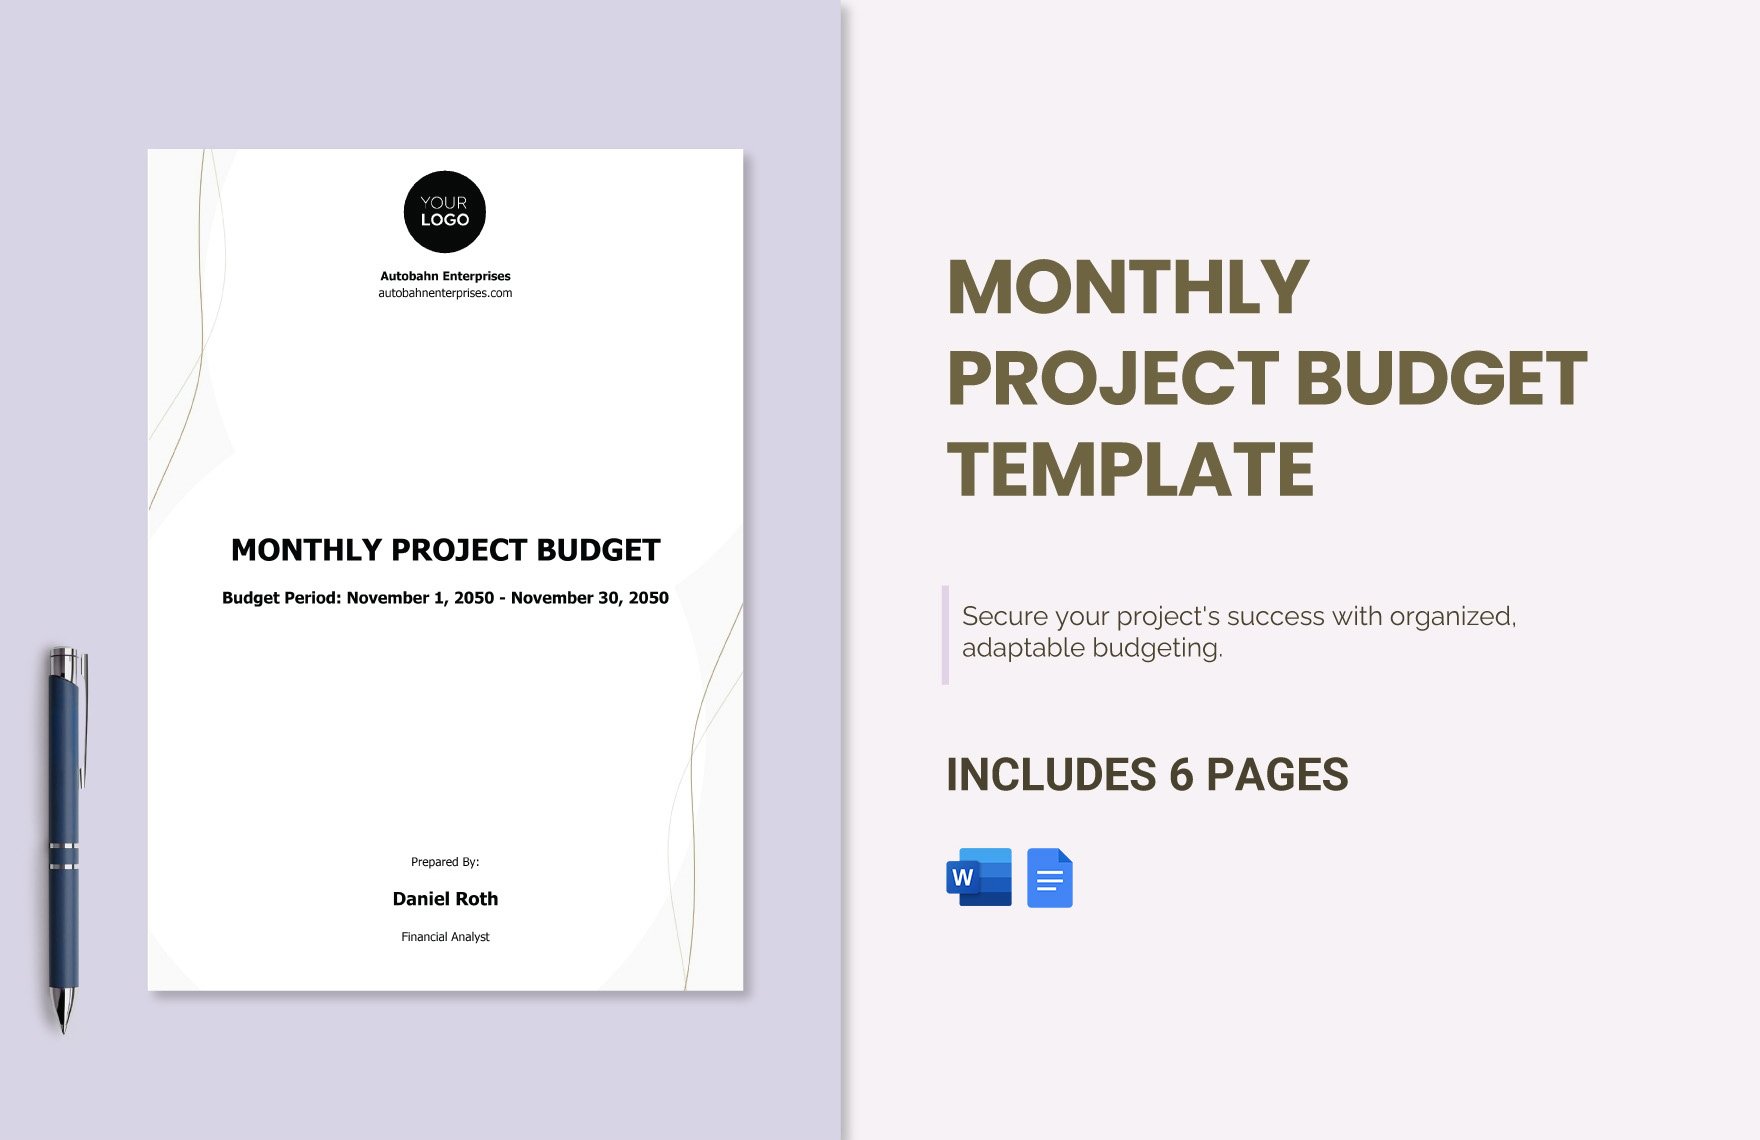 Monthly Project Budget Template in Word, Google Docs